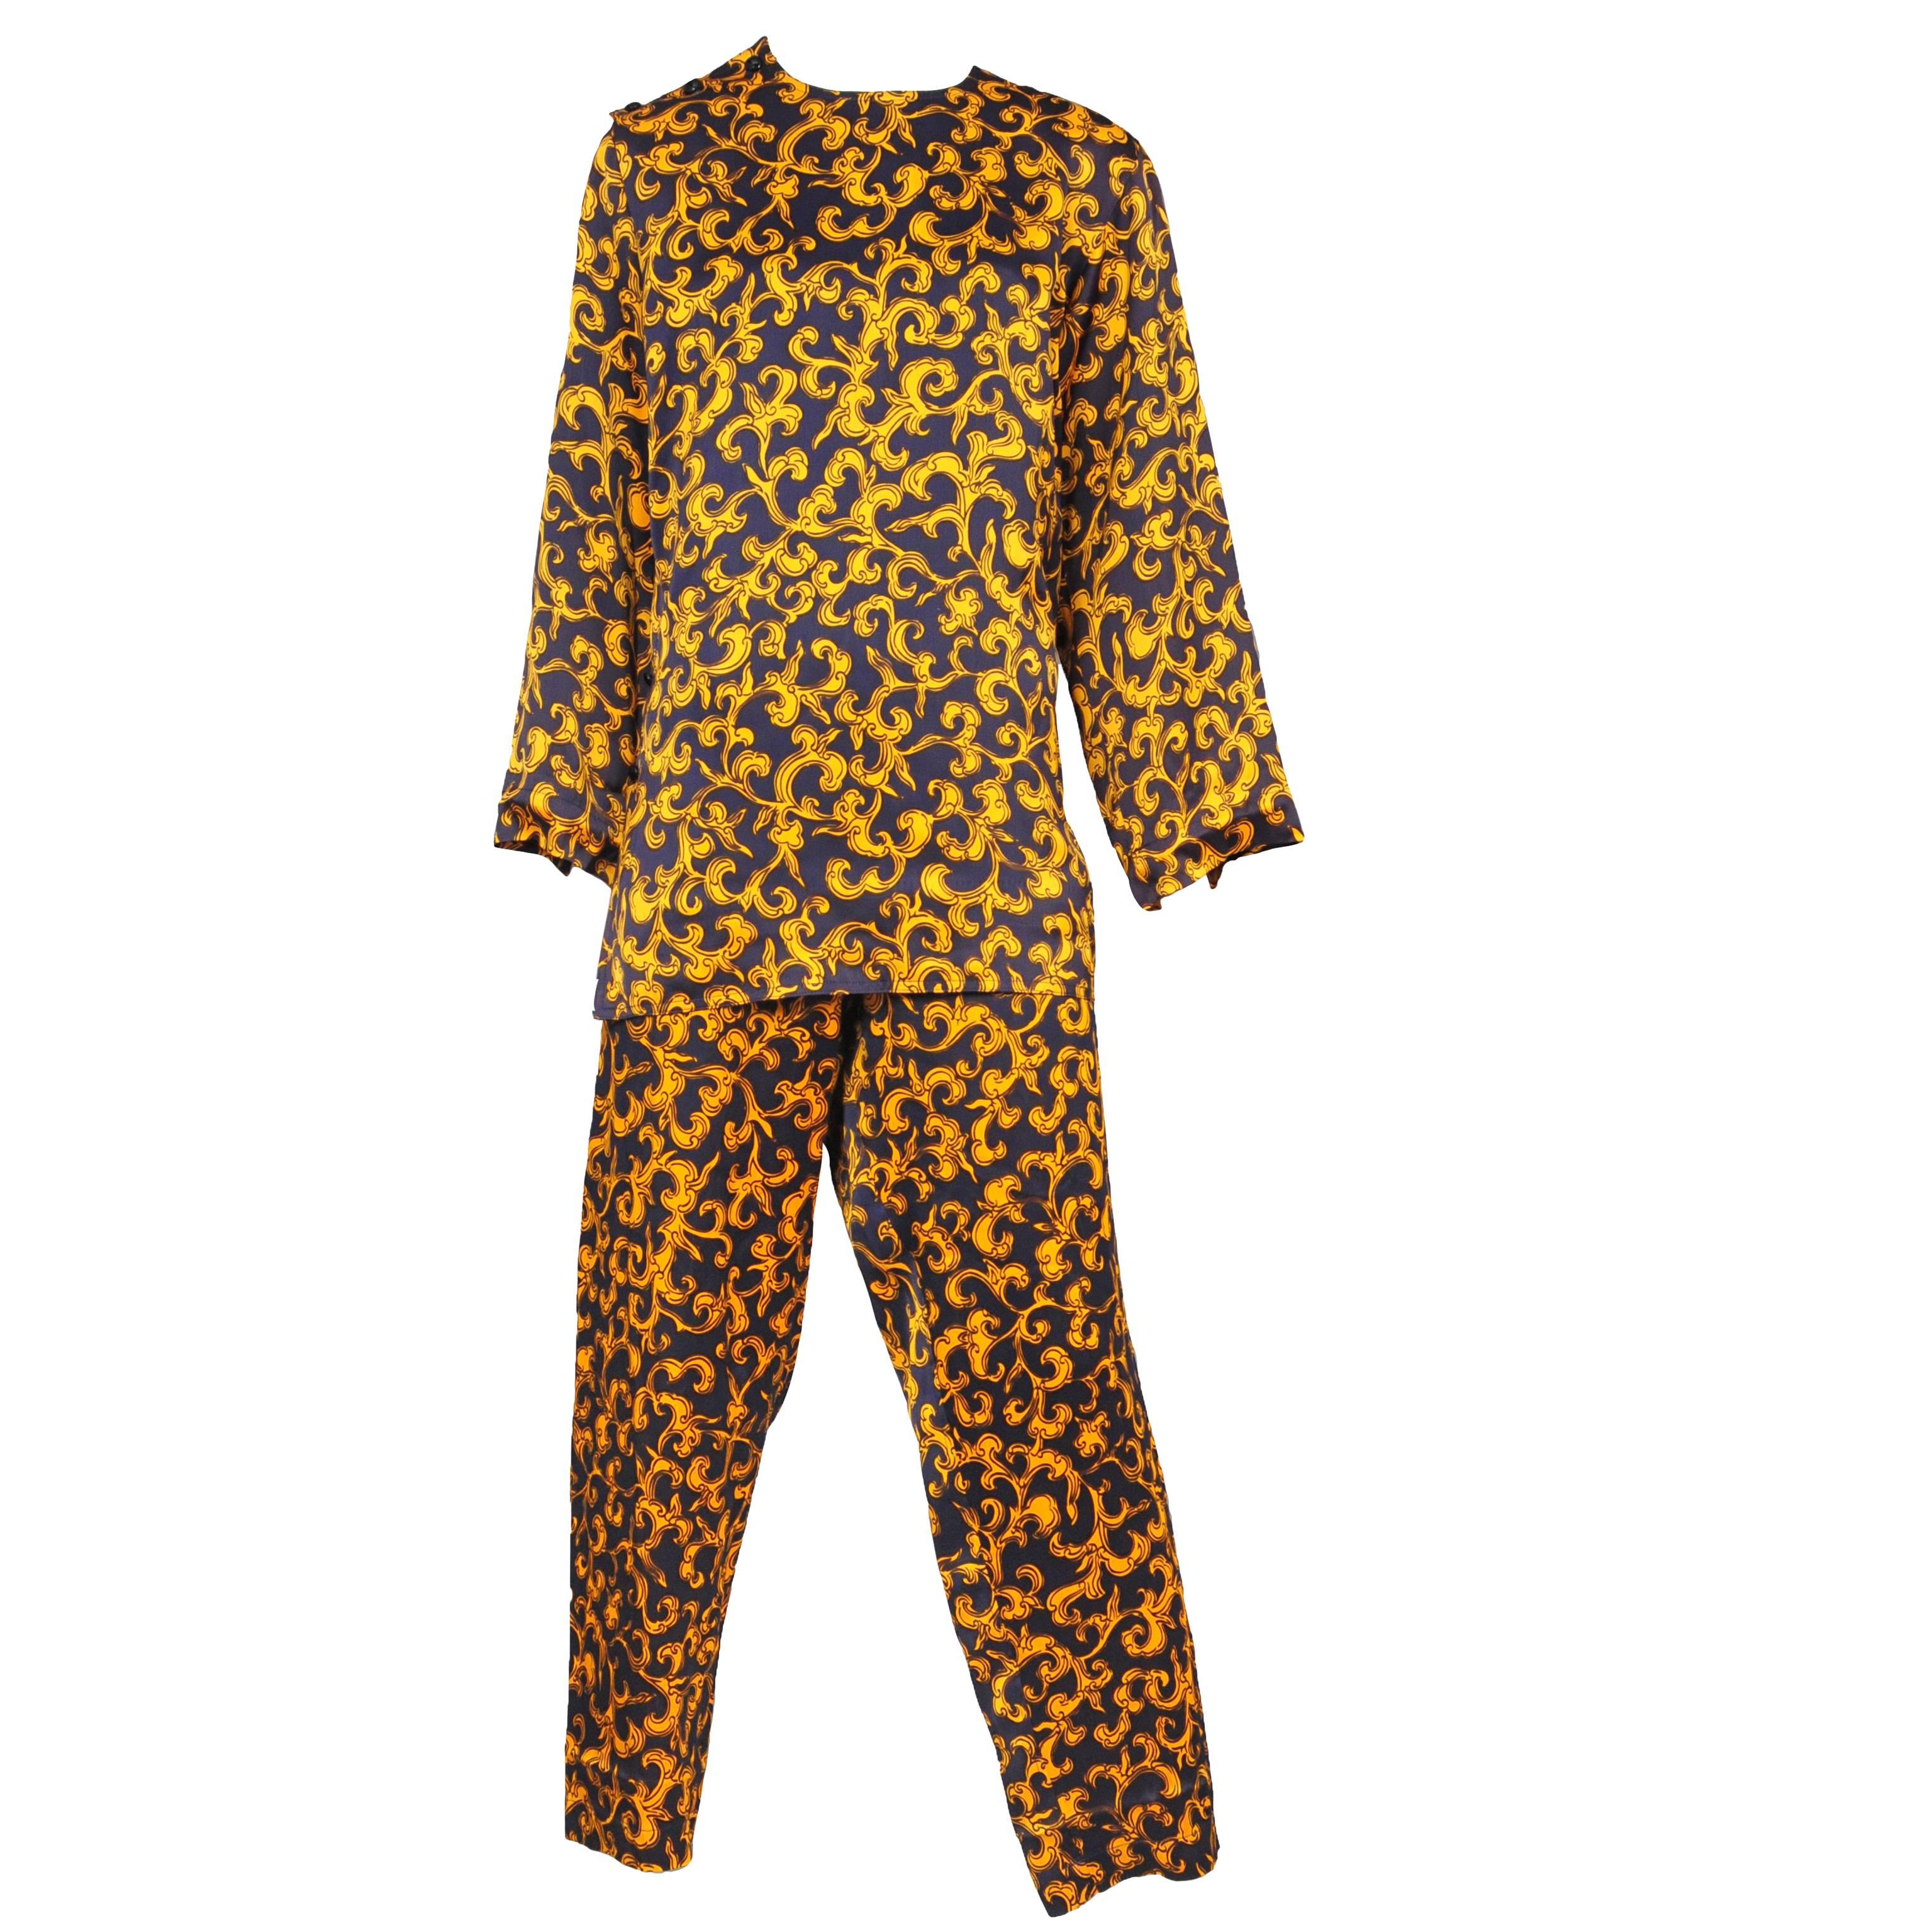 Vintage Yves Saint Laurent navy and gold baroque print pajama style pant set. 
Please inquire for additional images.